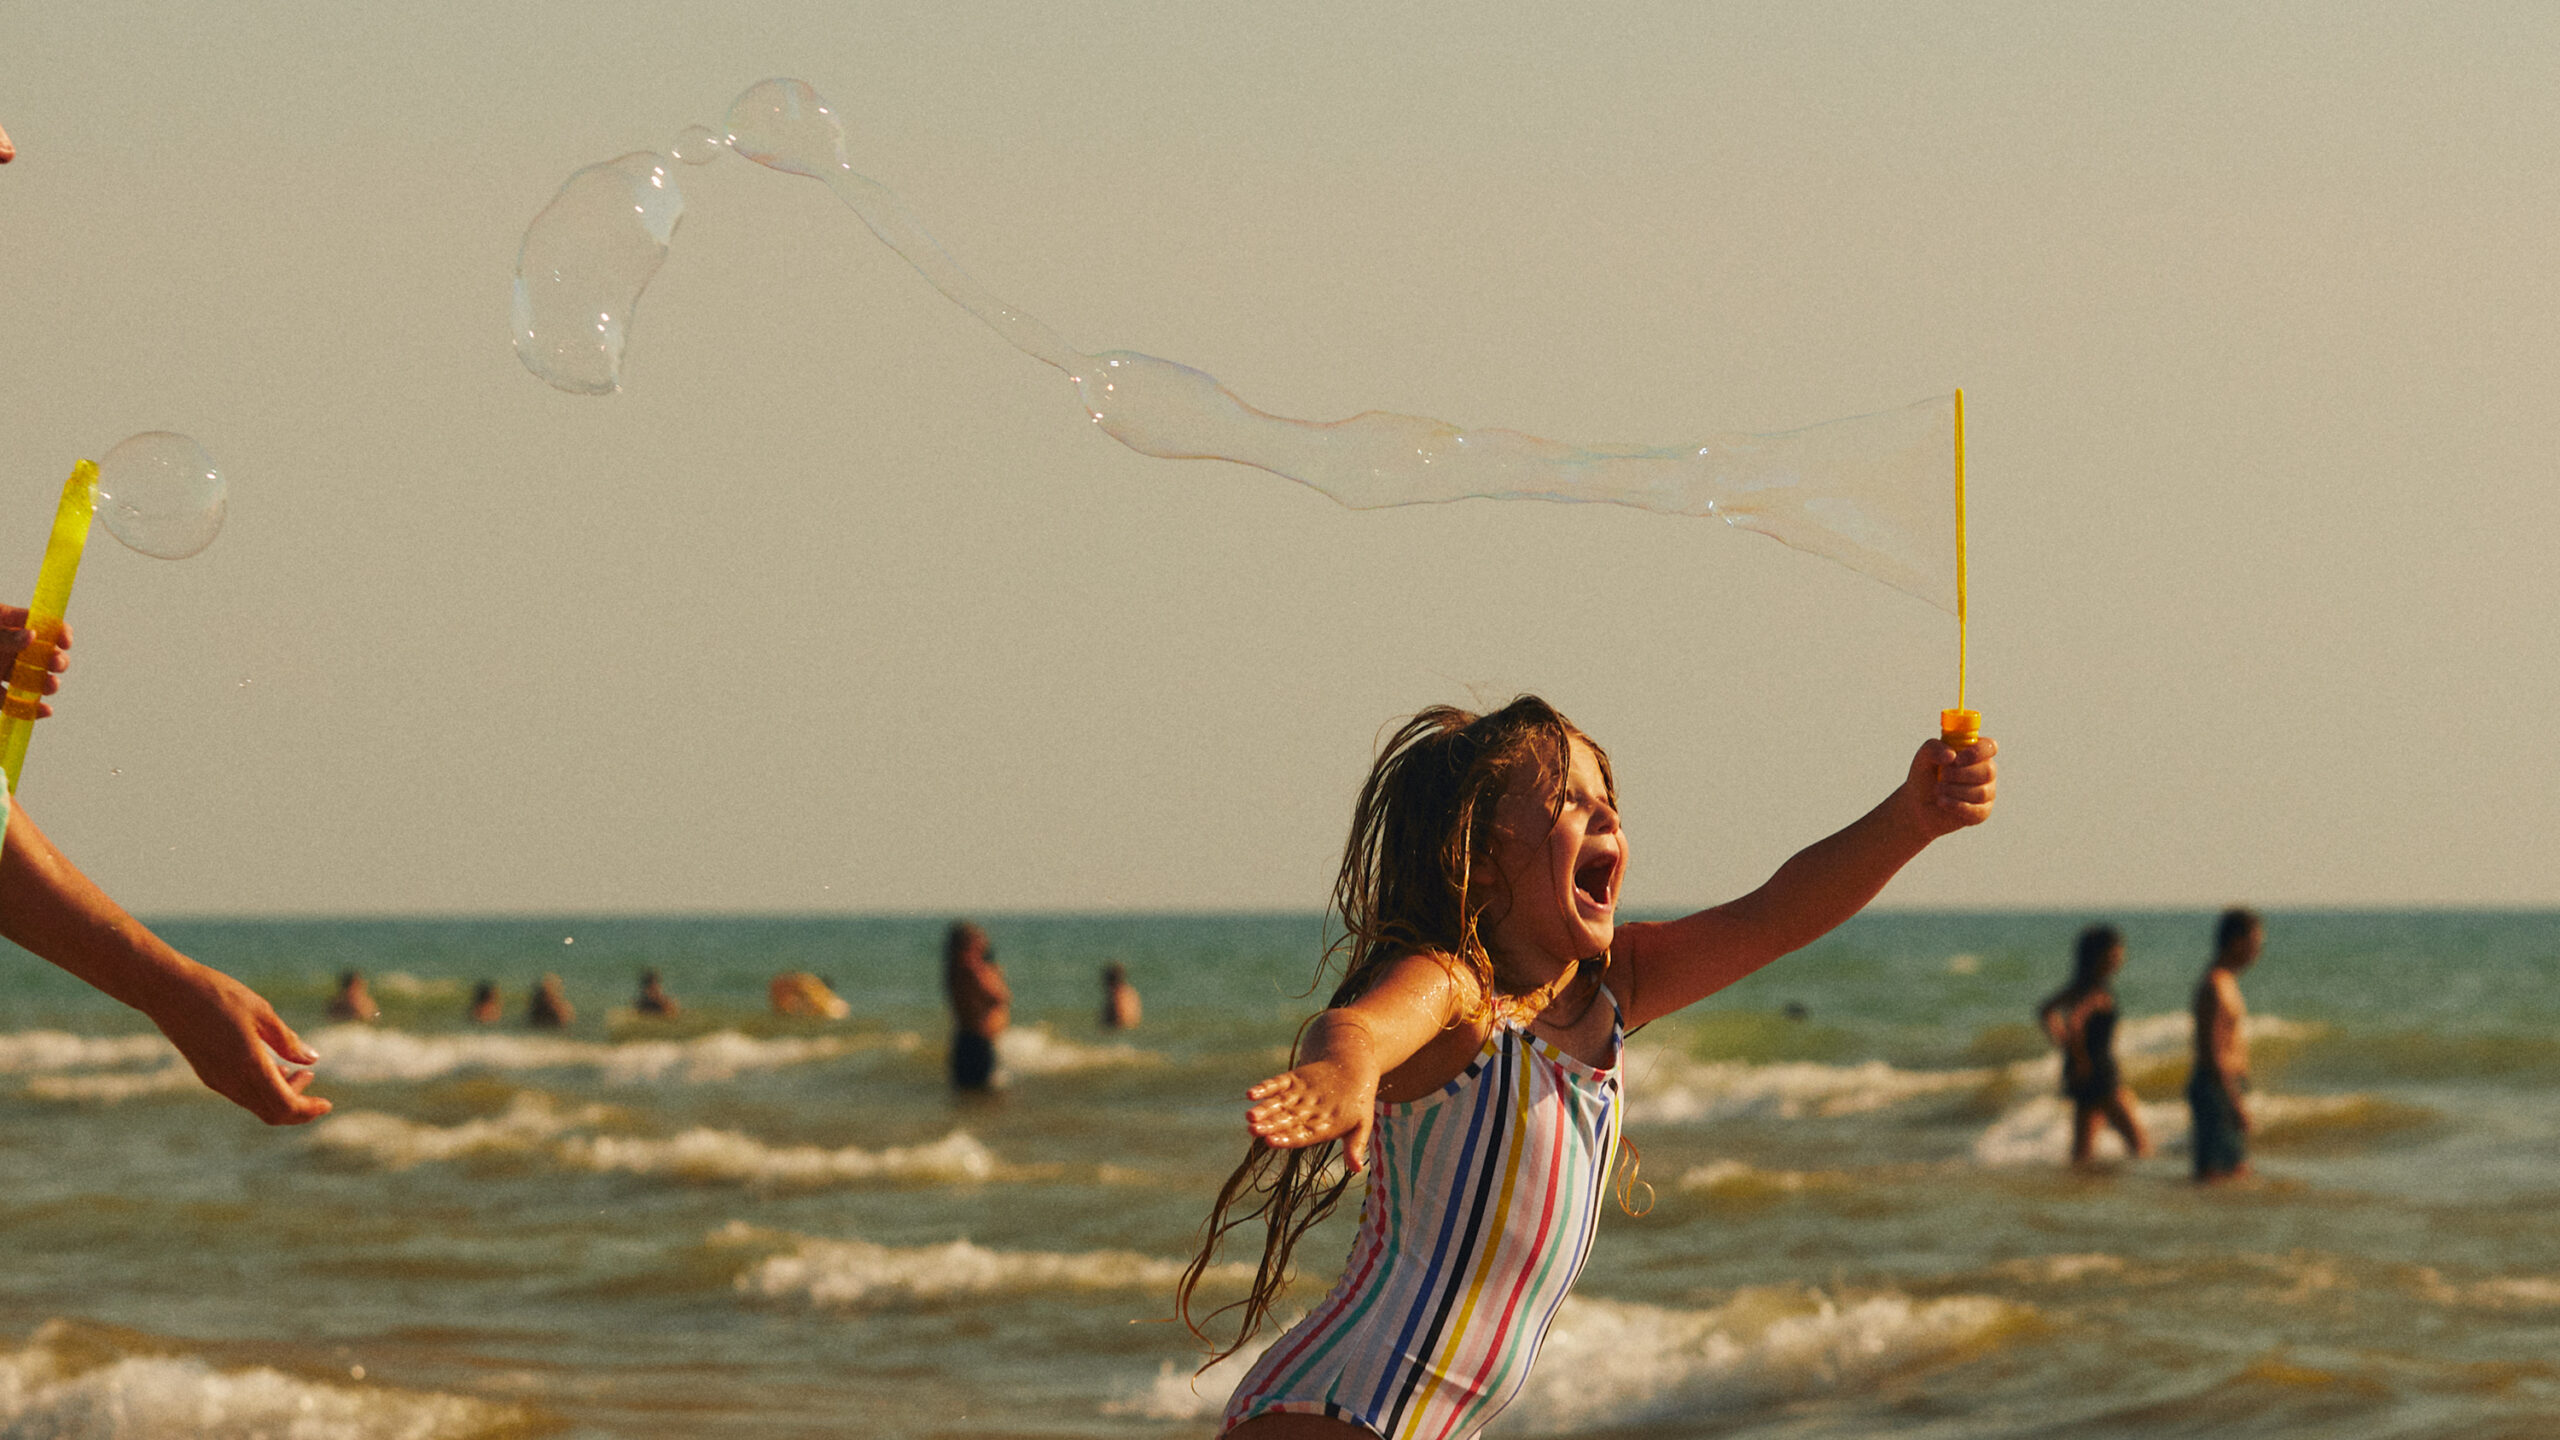 A young girl running down the beach blowing bubbles